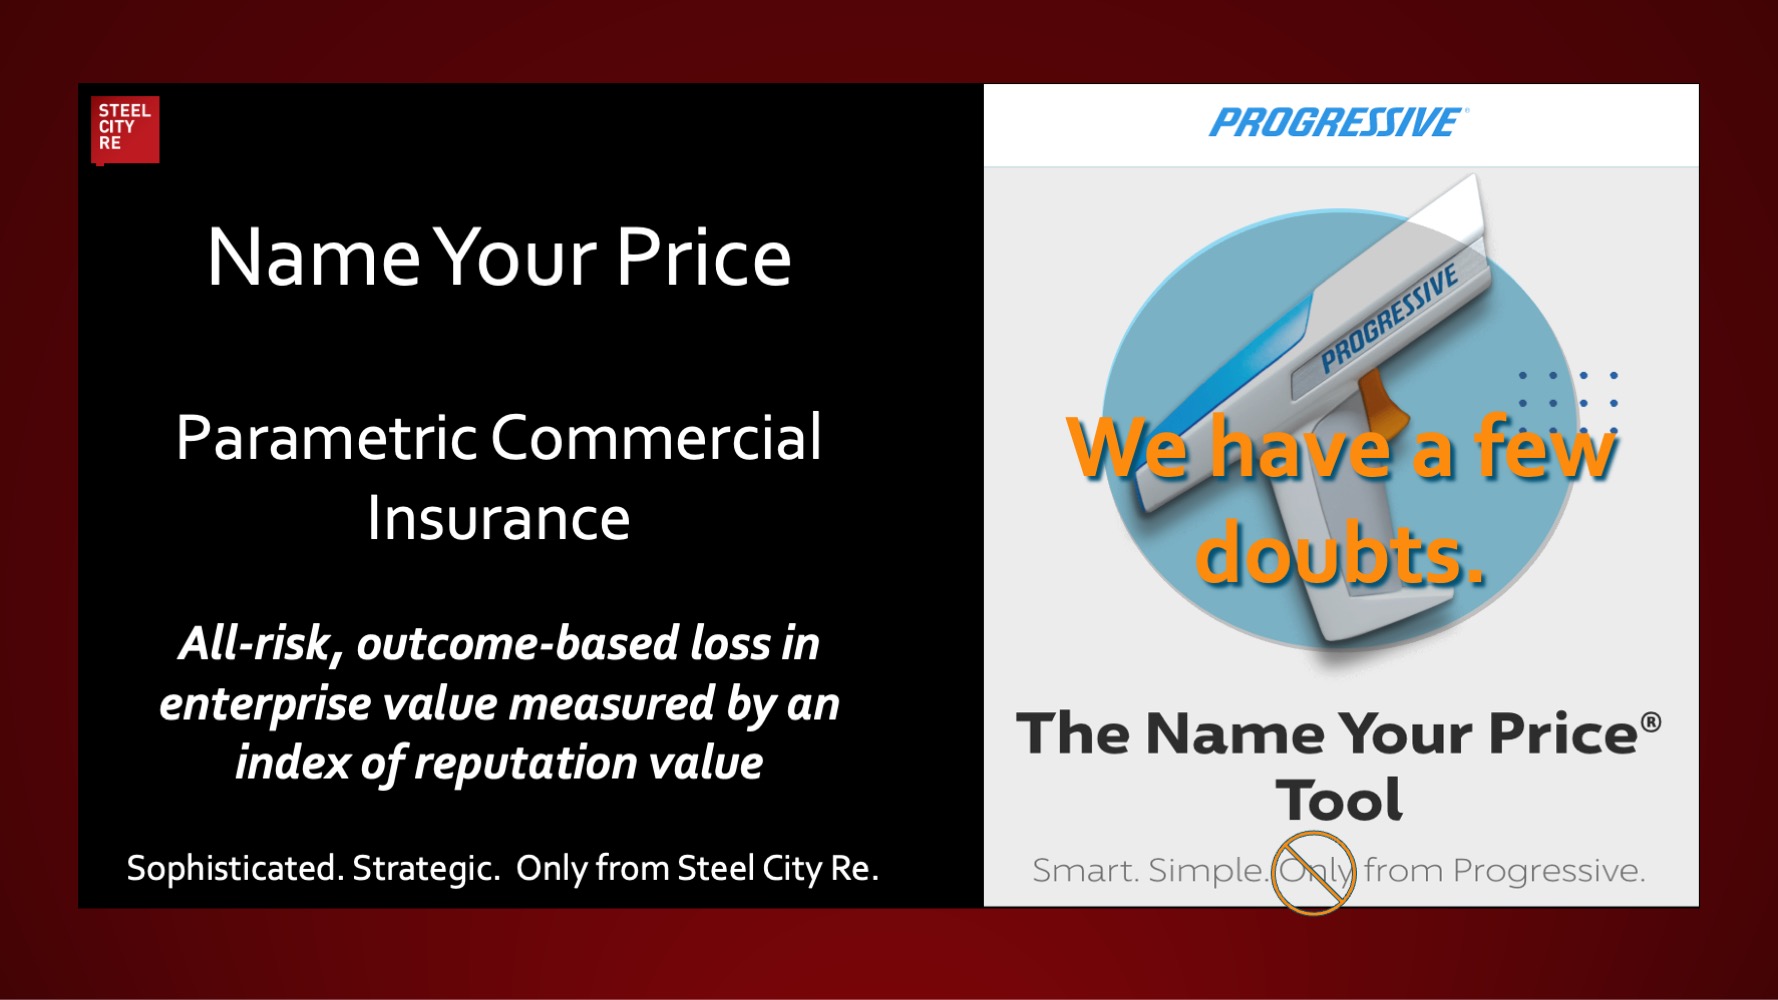 Parametric commercial insurance: name your price. All-risk, outcome-based loss in enterprise value measured by an index of reputation value